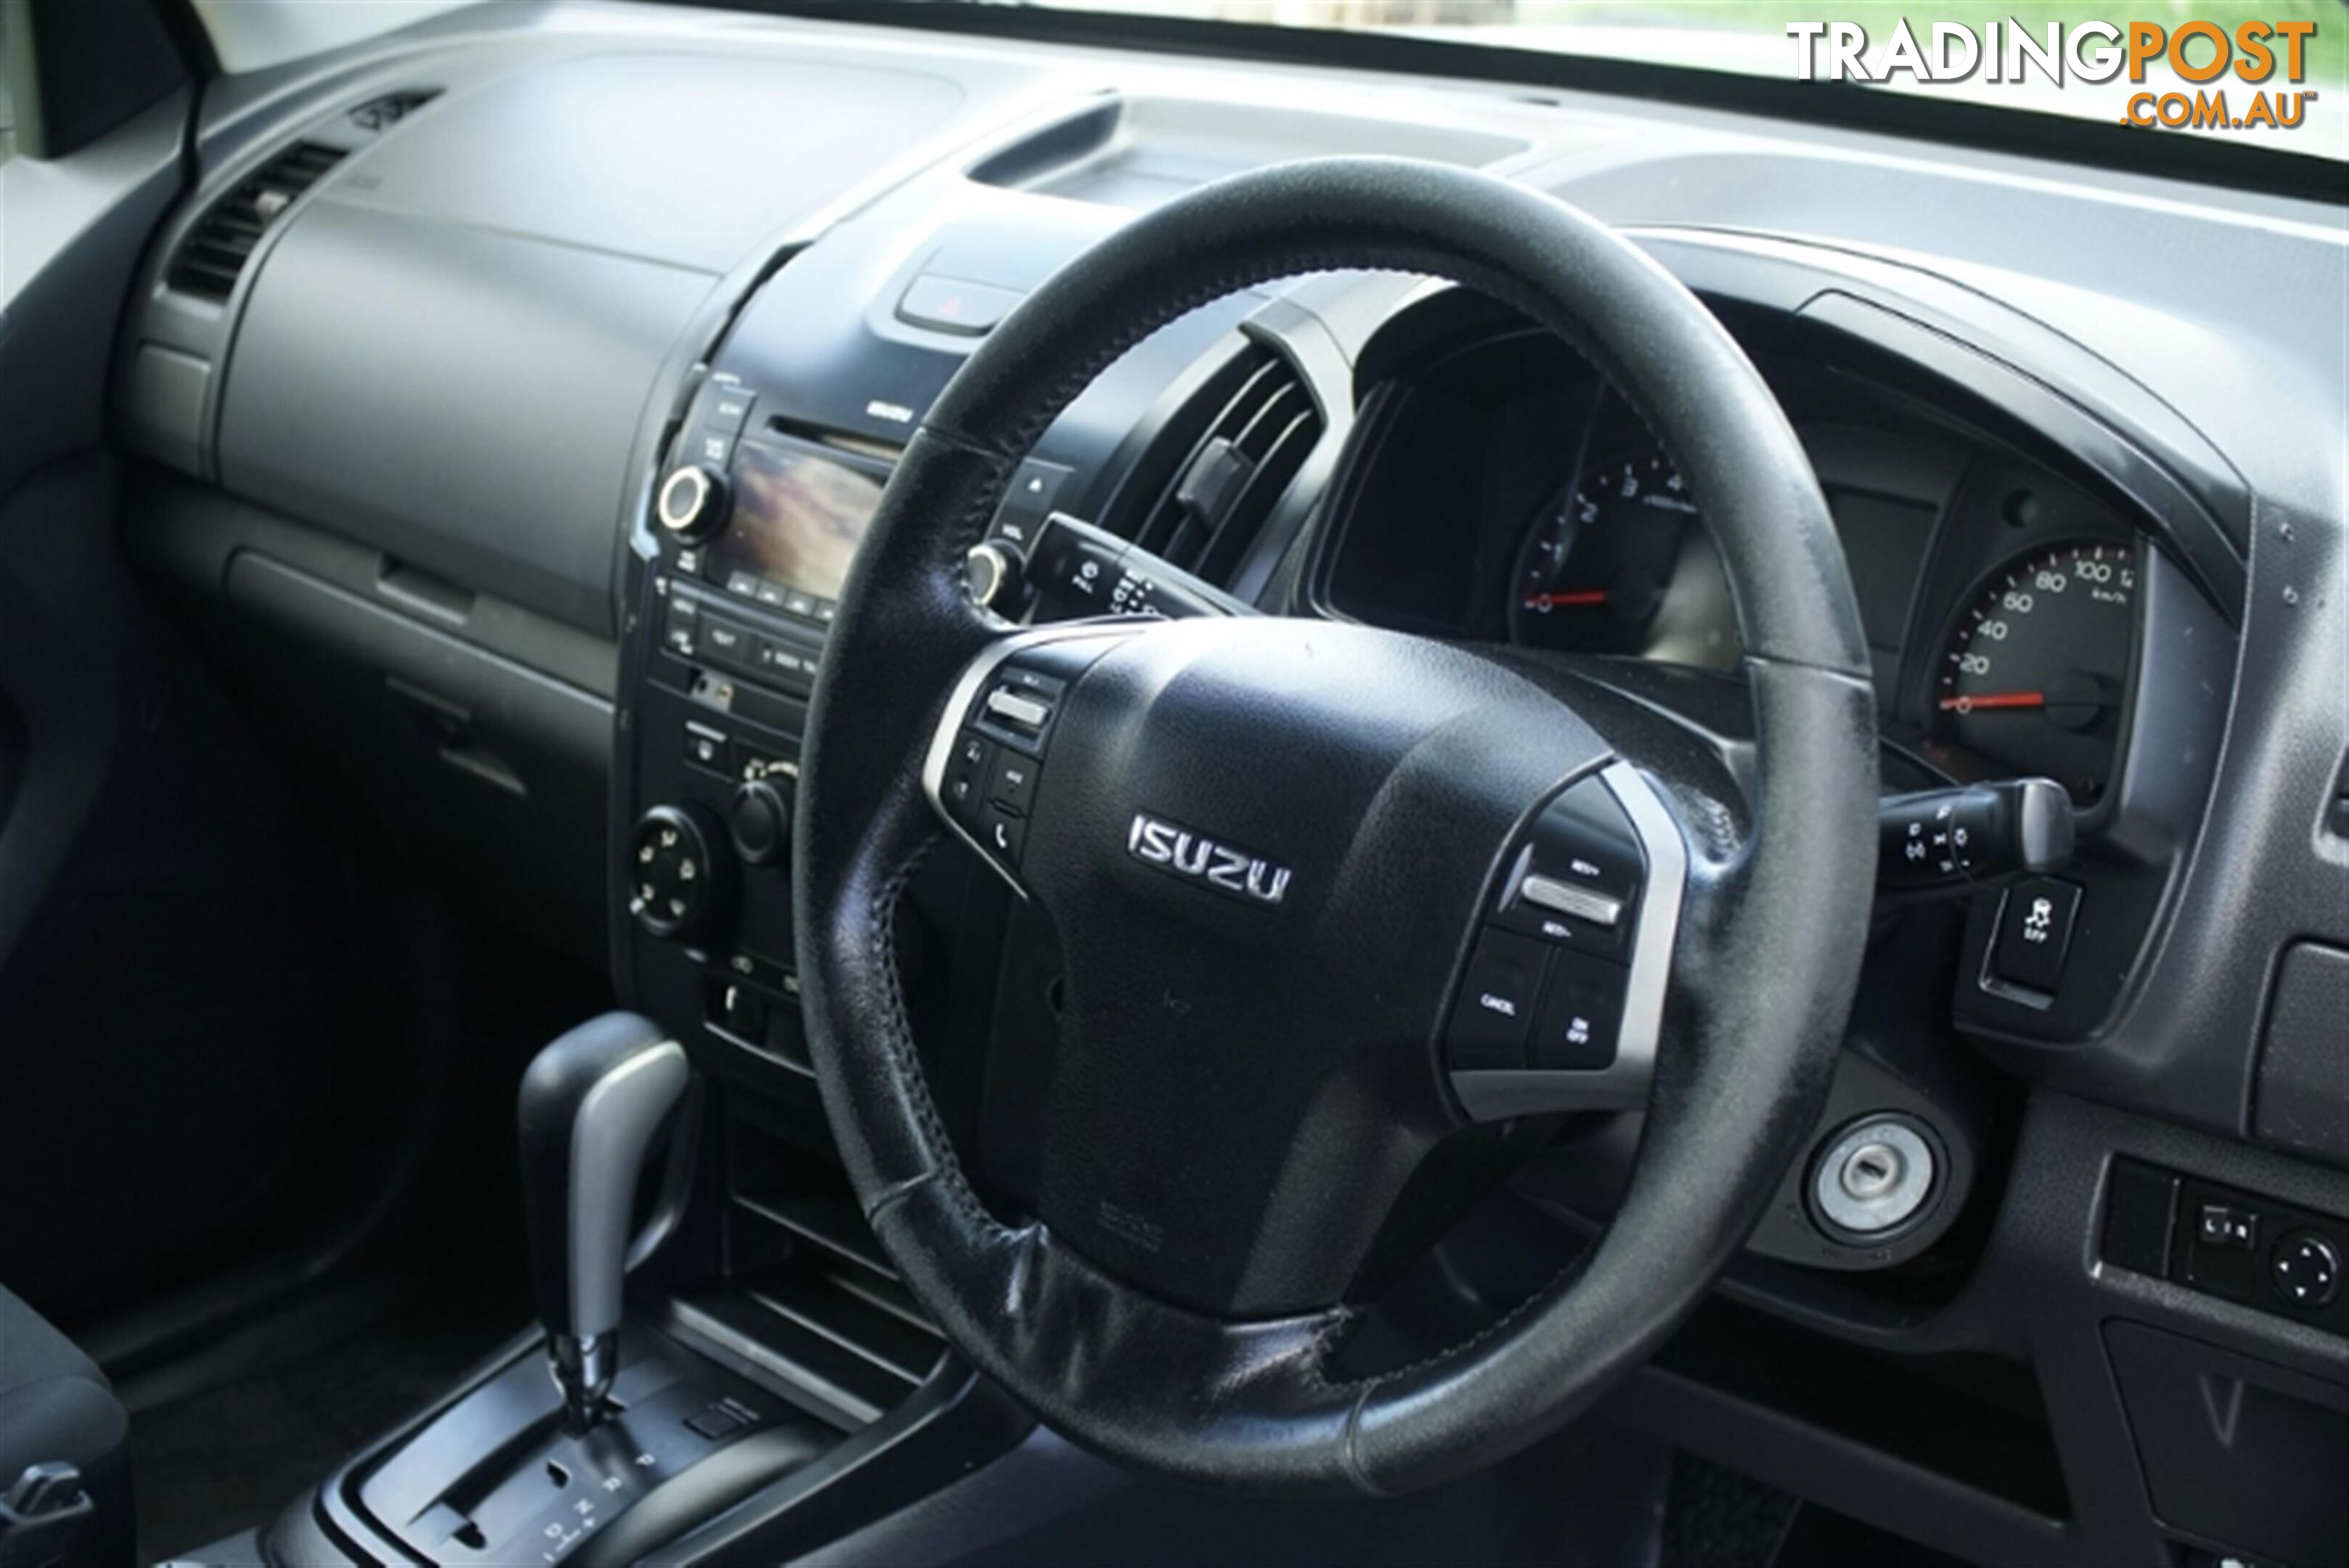 2015 ISUZU D-MAX SX EXTENDED CAB MY15 CAB CHASSIS